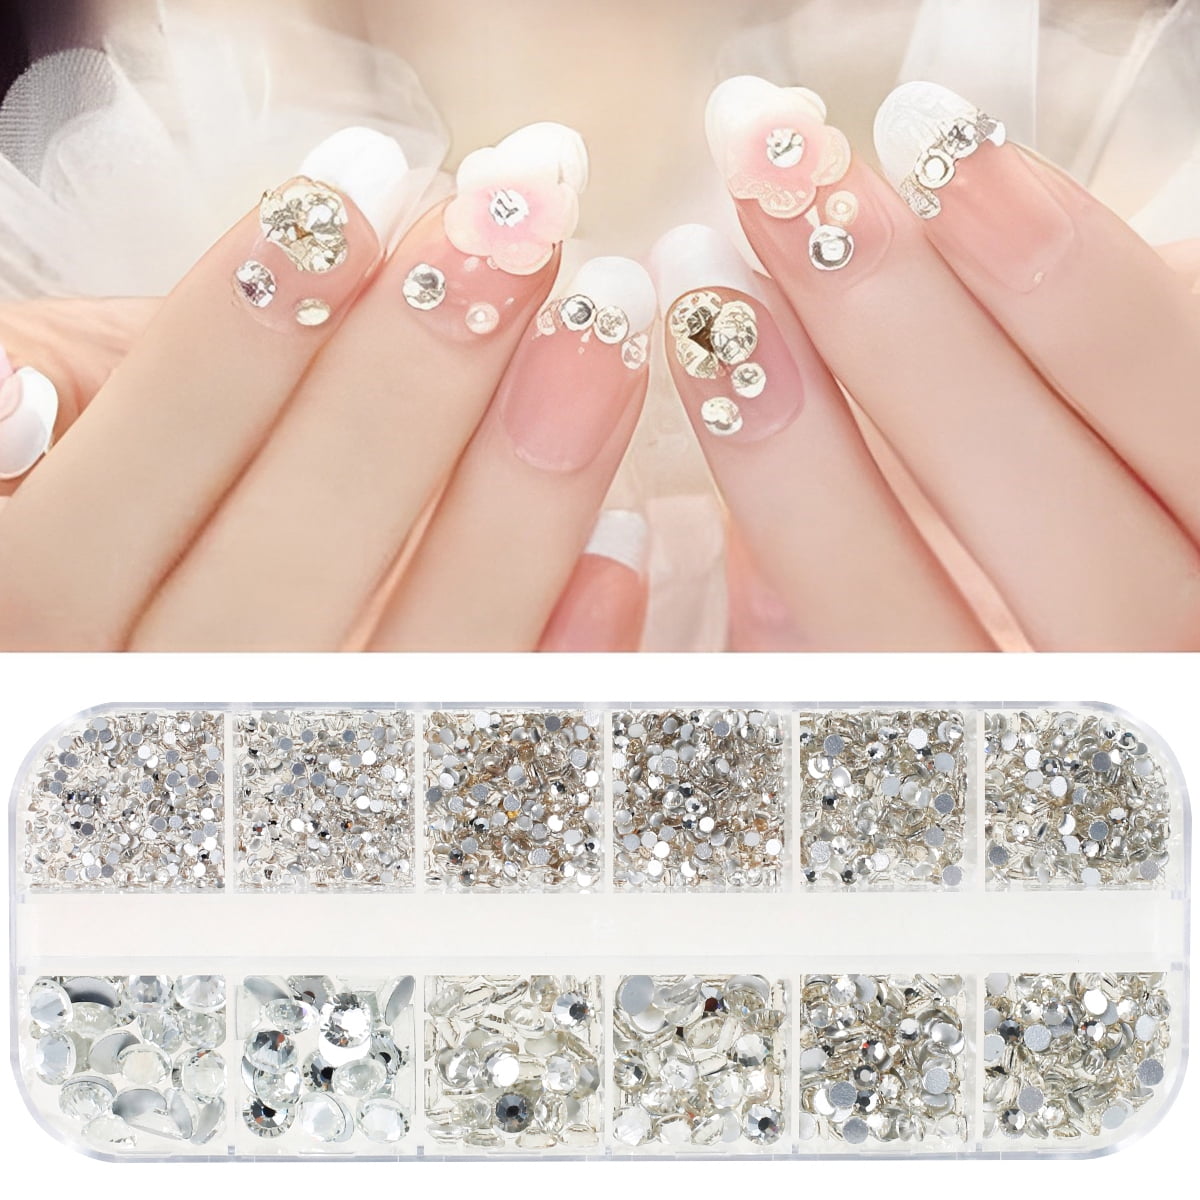 Acrylic Nail Art Rhinestone Kit With 21 Grids, Mixed Sizes, Pick Up Pen,  Large Crystals Nails Decorations, 3D AB Flat Gem Set From Xx_makei, $24.68